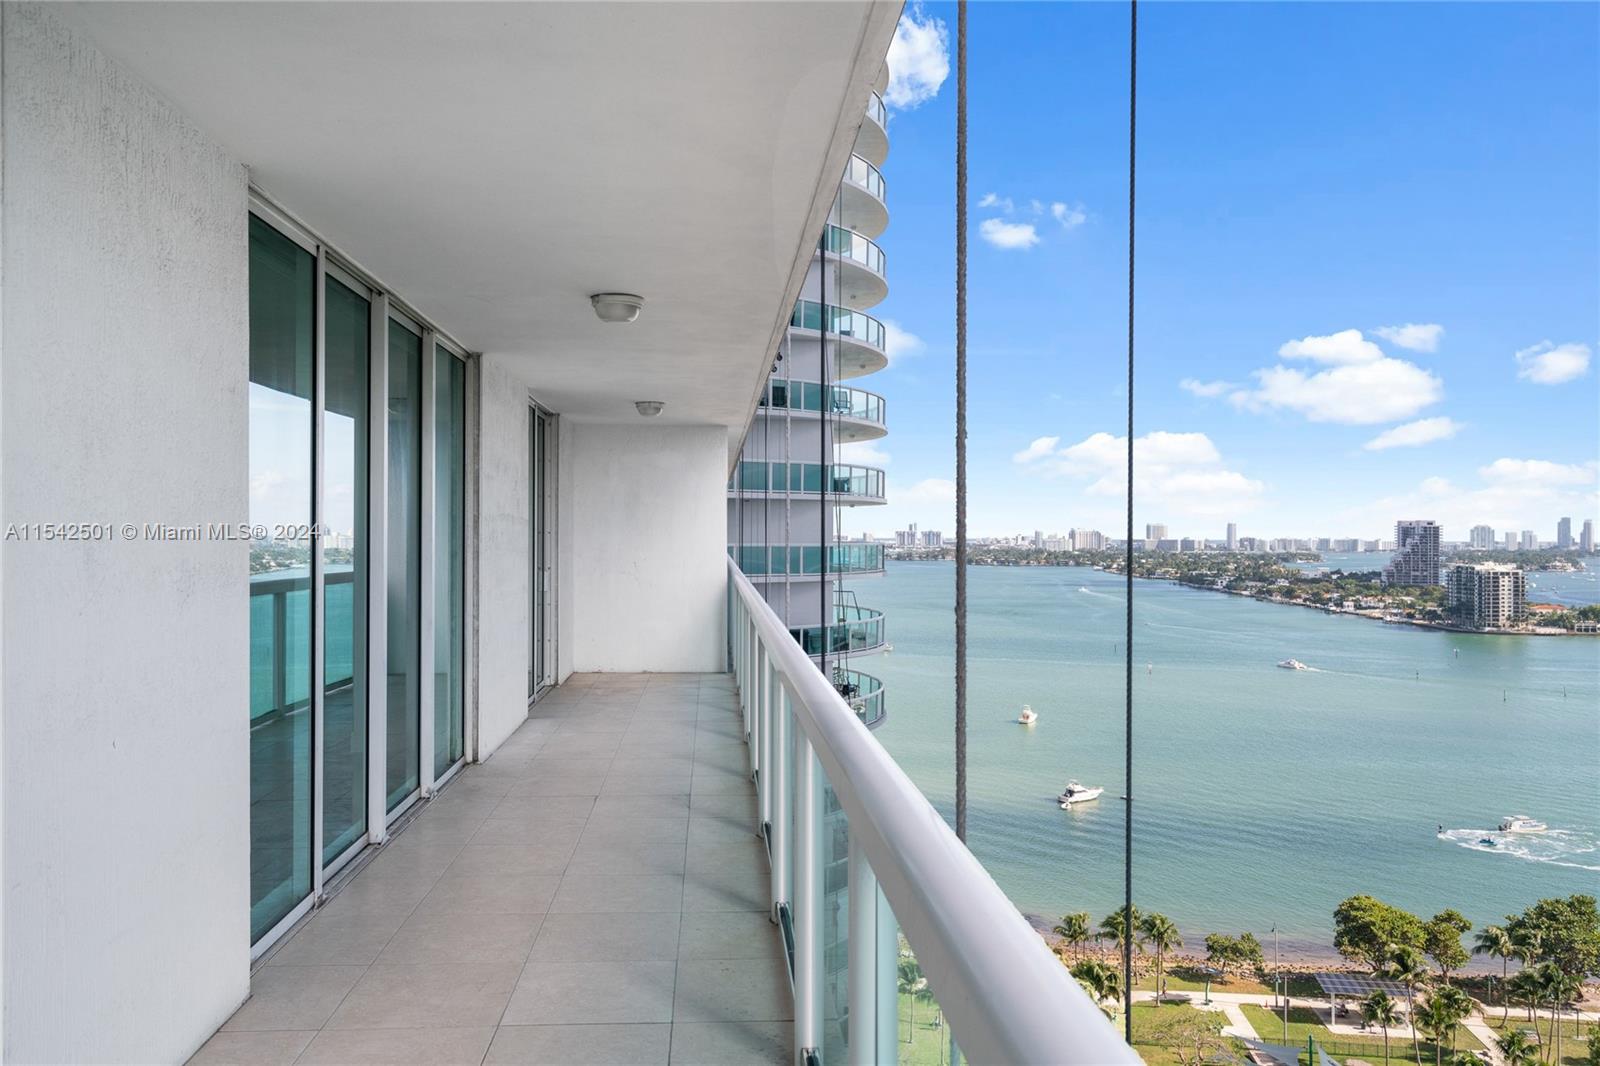 BEAUTIFUL BAY VIEW APARTMENT FOR RENT IN DESIRABLE EDGEWATER AREA OF MIAMI! Two-bedroom apartment for long-term rent ONLY in gorgeous 1800 Club. The building offers a variety of amenities for its residents, including a state-of-the-art fitness center, co-ed sauna and steam room, massage room, heated swimming pool, hot tub, party room, 24-hour concierge, 24-hour security, and 24-hour valet parking. 1800 Club is located directly across the street from Margaret Pace Park which has tennis courts, a basketball court, a children’s playground, a volleyball court, and tons of open green space. AVAILABLE JUNE 1st. Unfurnished.